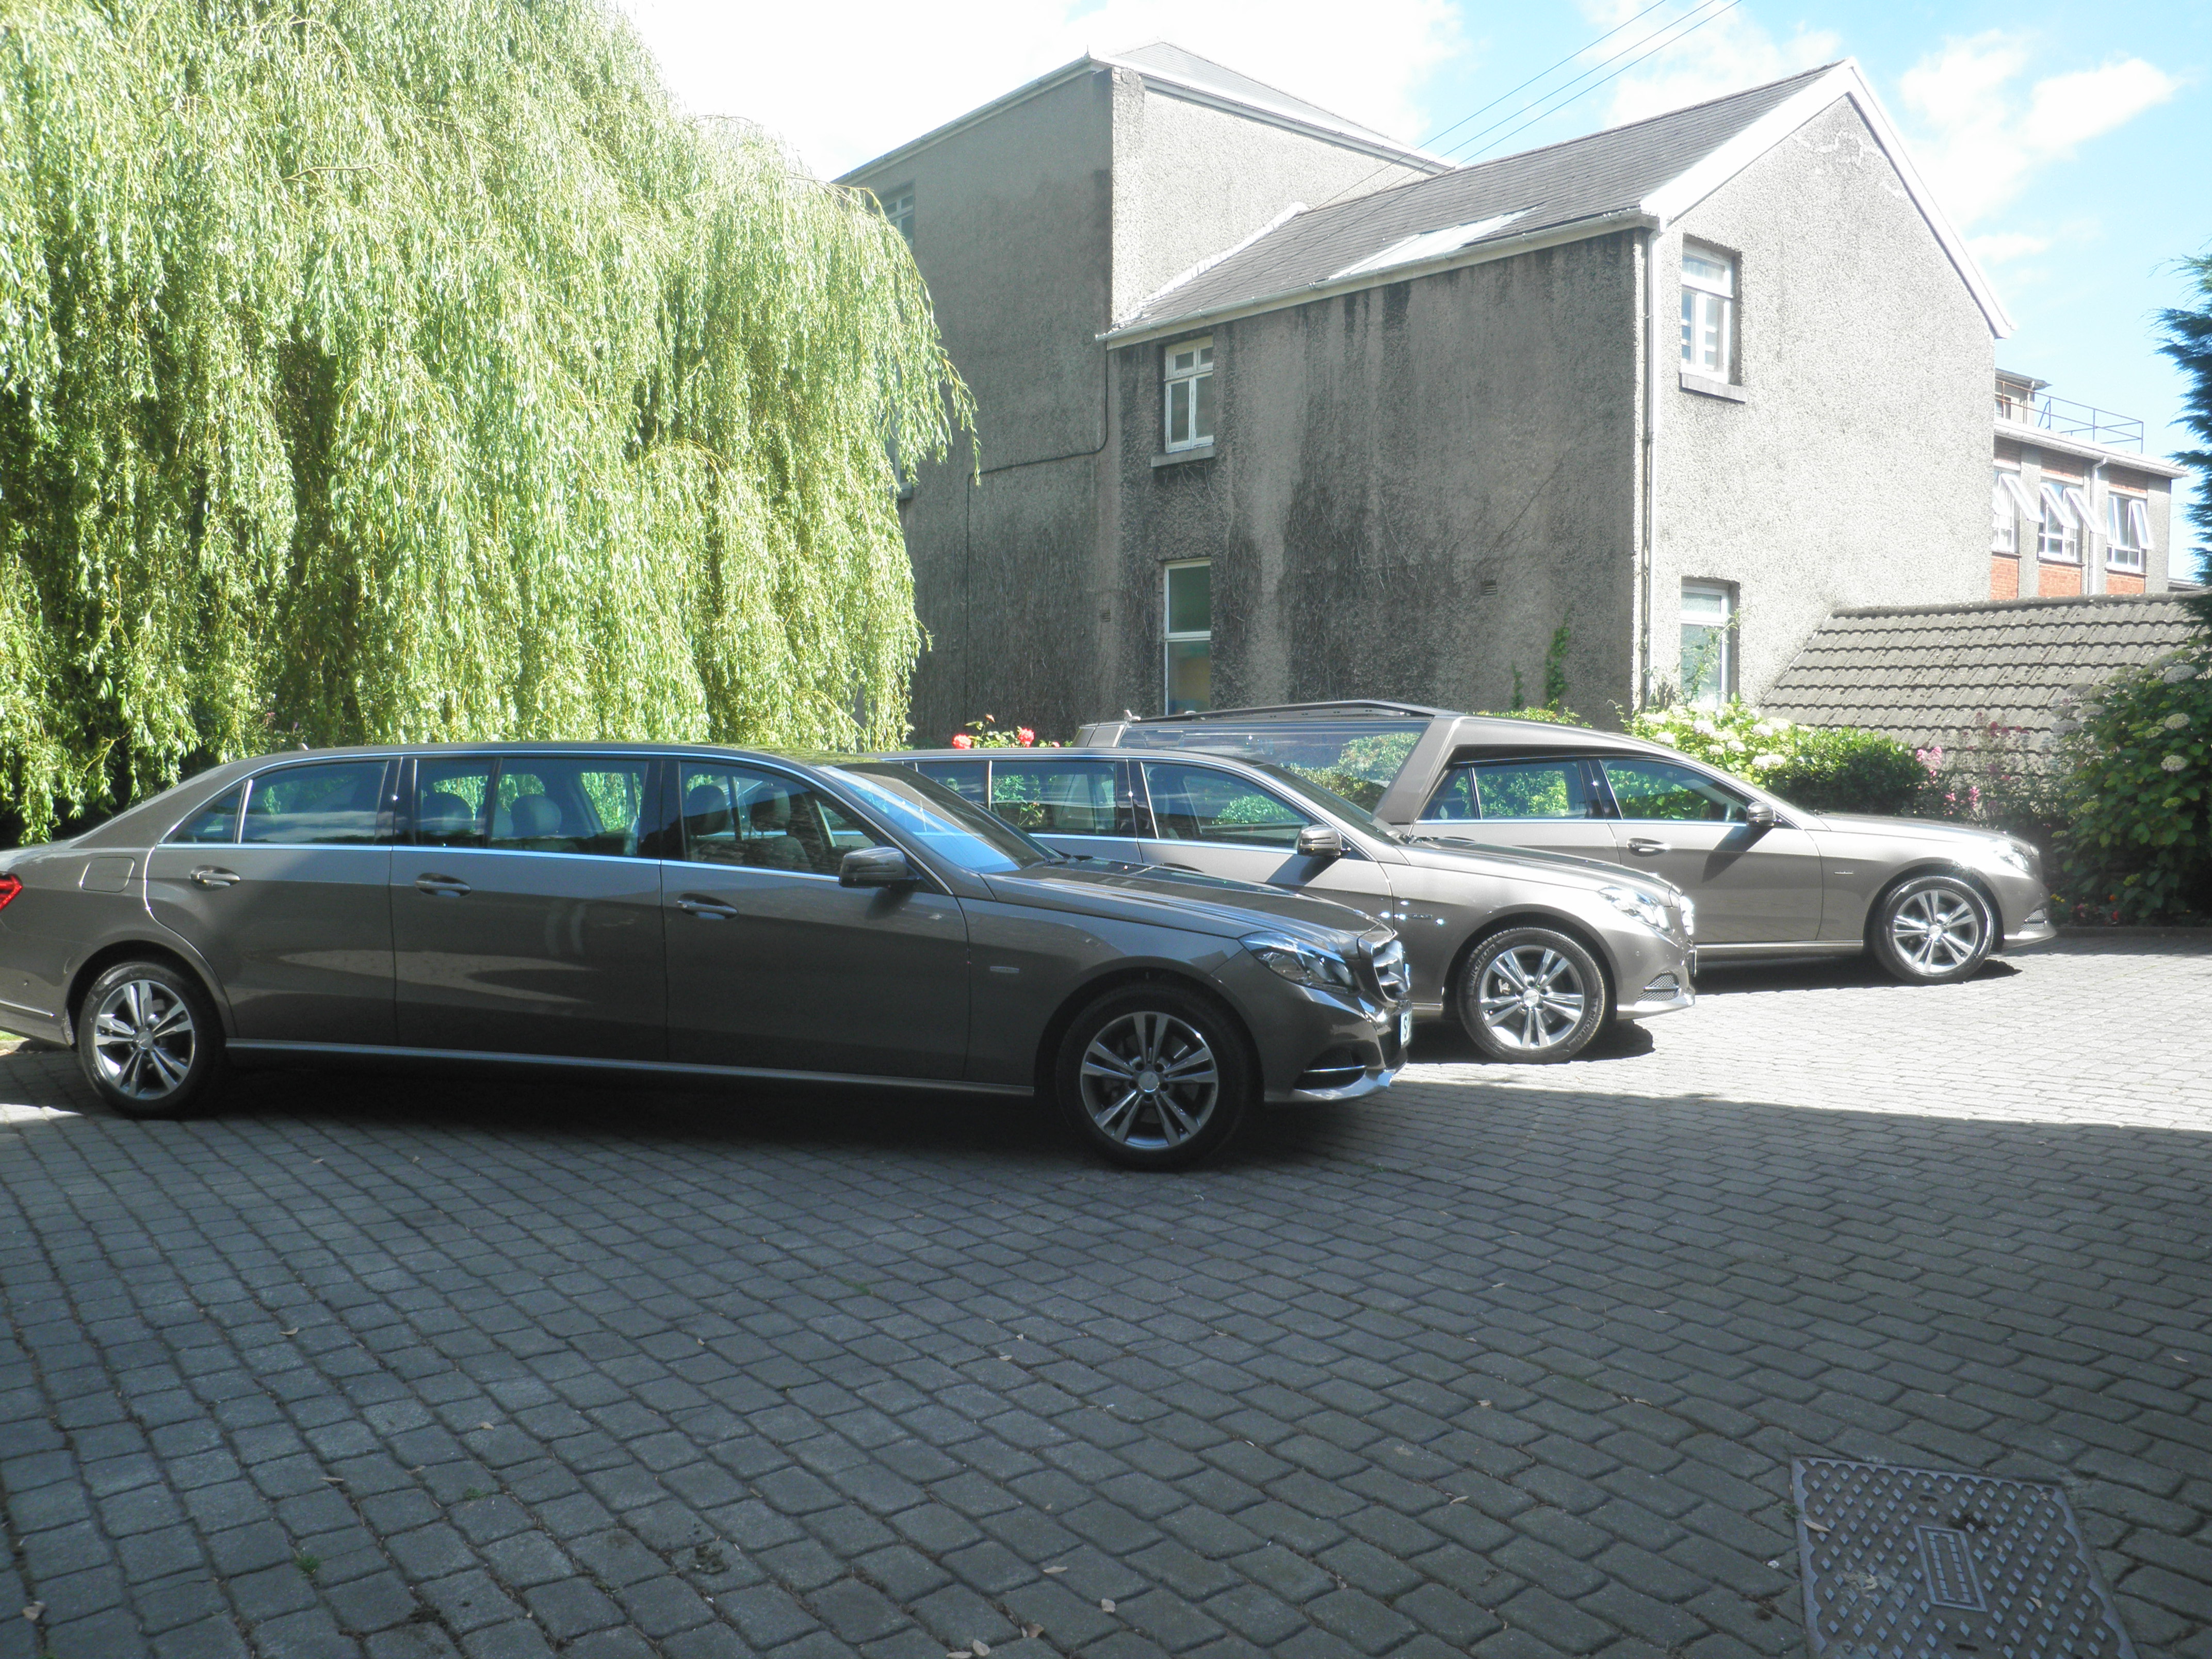 New Look Funeral Fleet For St James Funeral Home Superiorvehicles